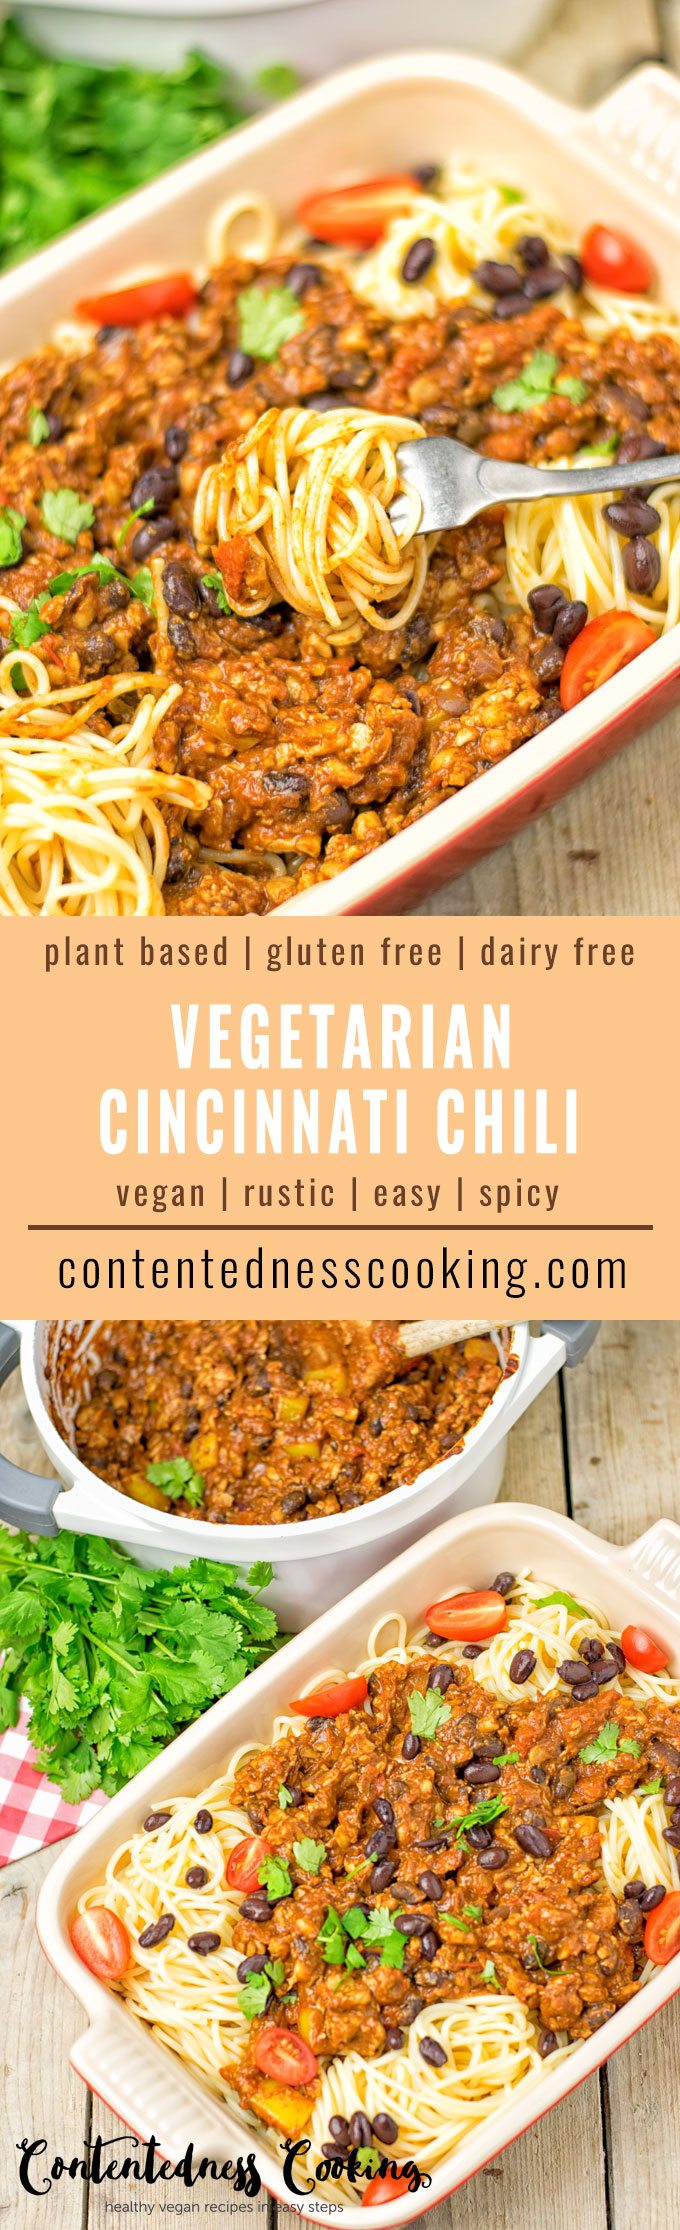 Collage of two pictures of the Vegetarian Cincinnati Chili with recipe title text.